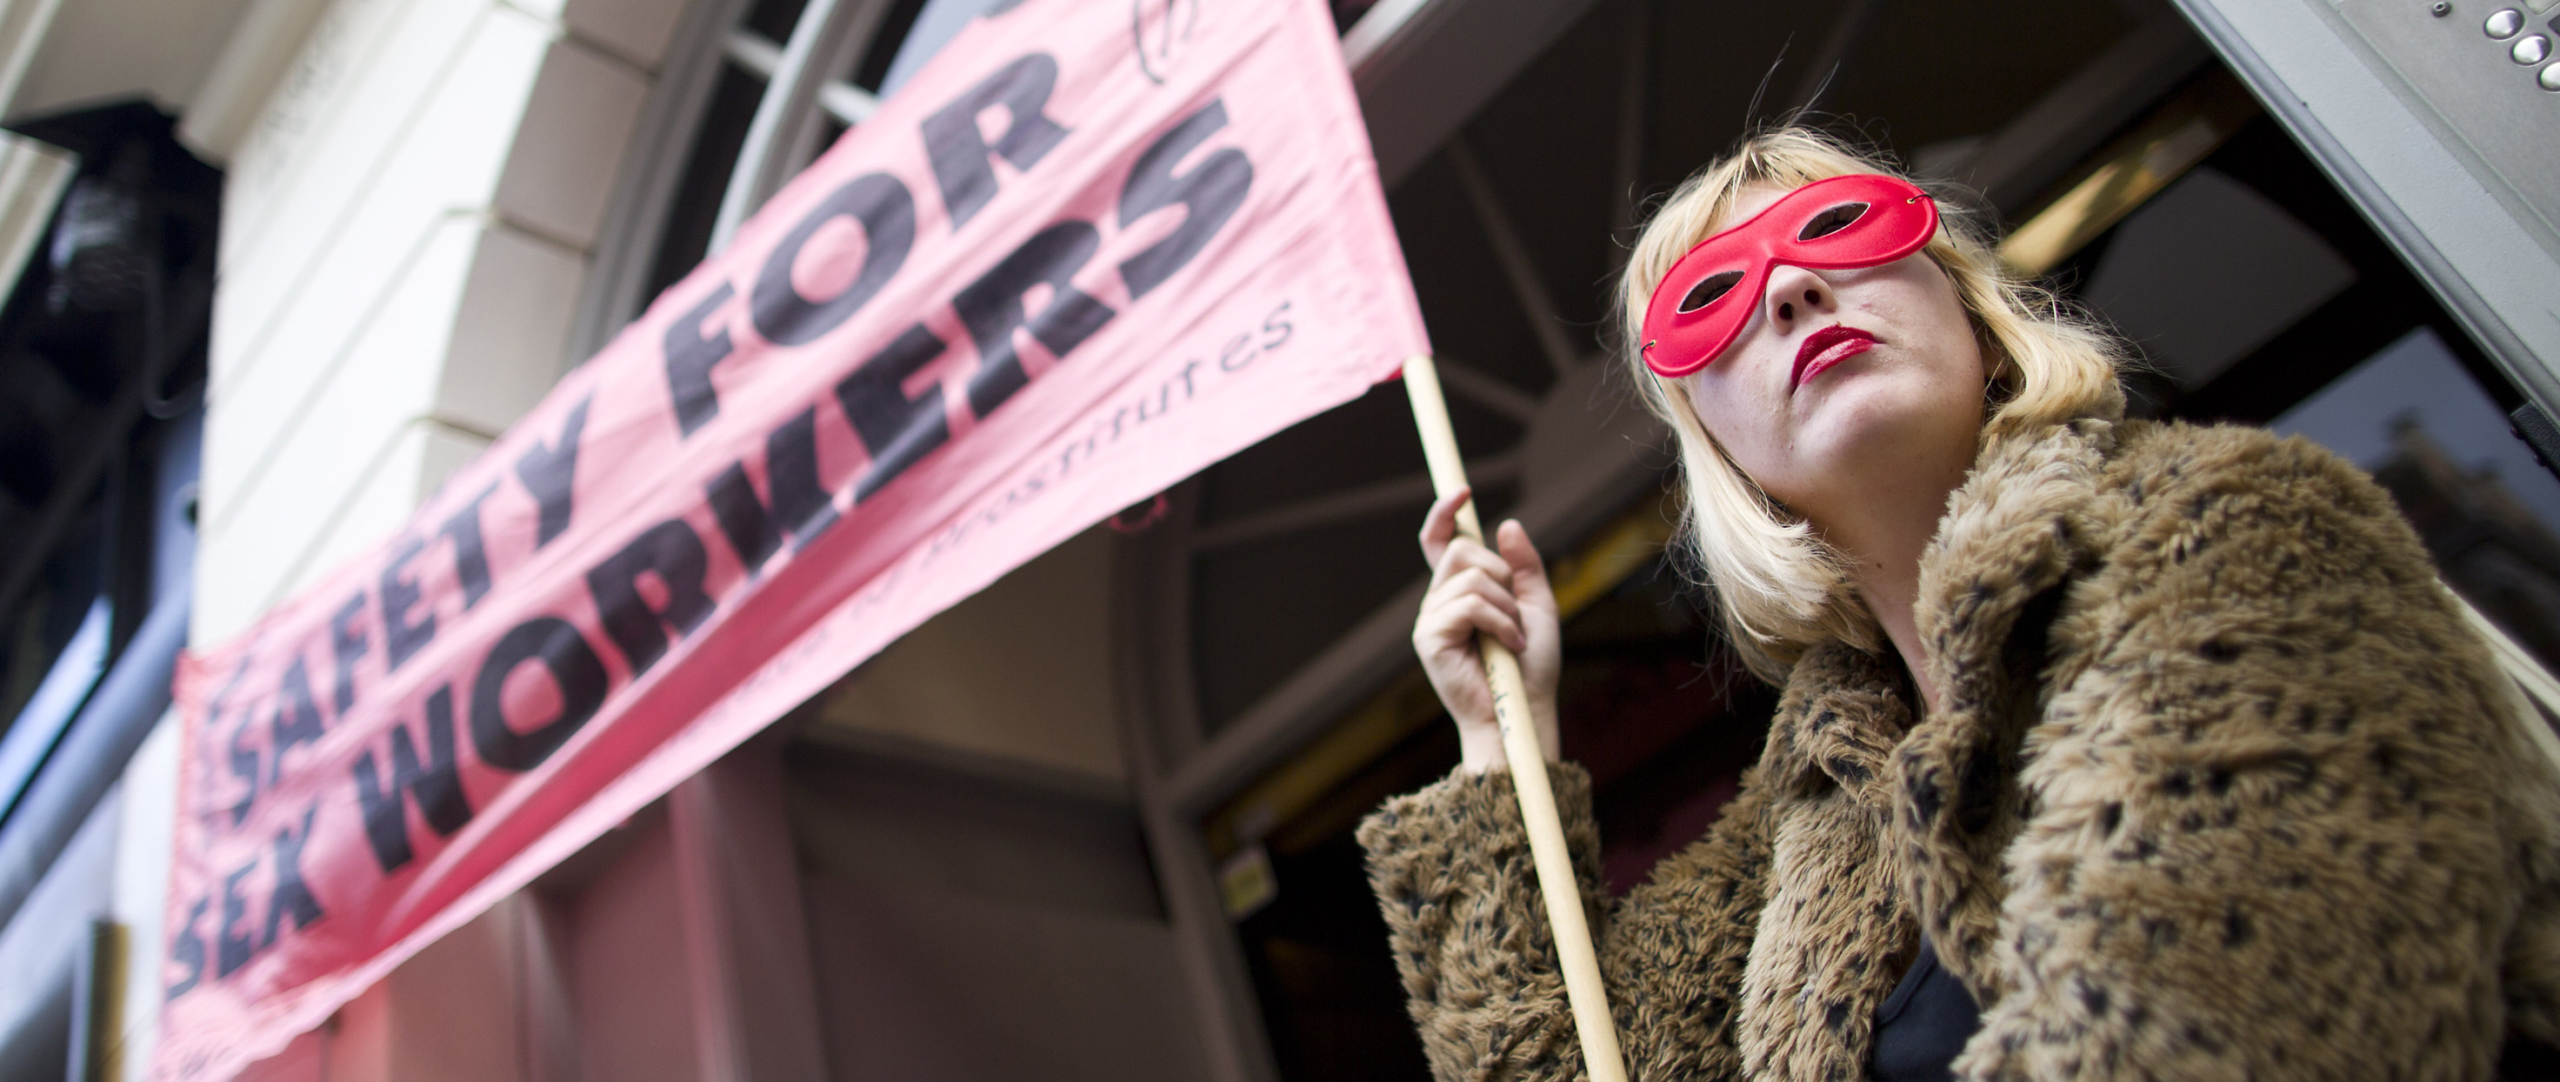 Sex Workers Rights are Human Rights image